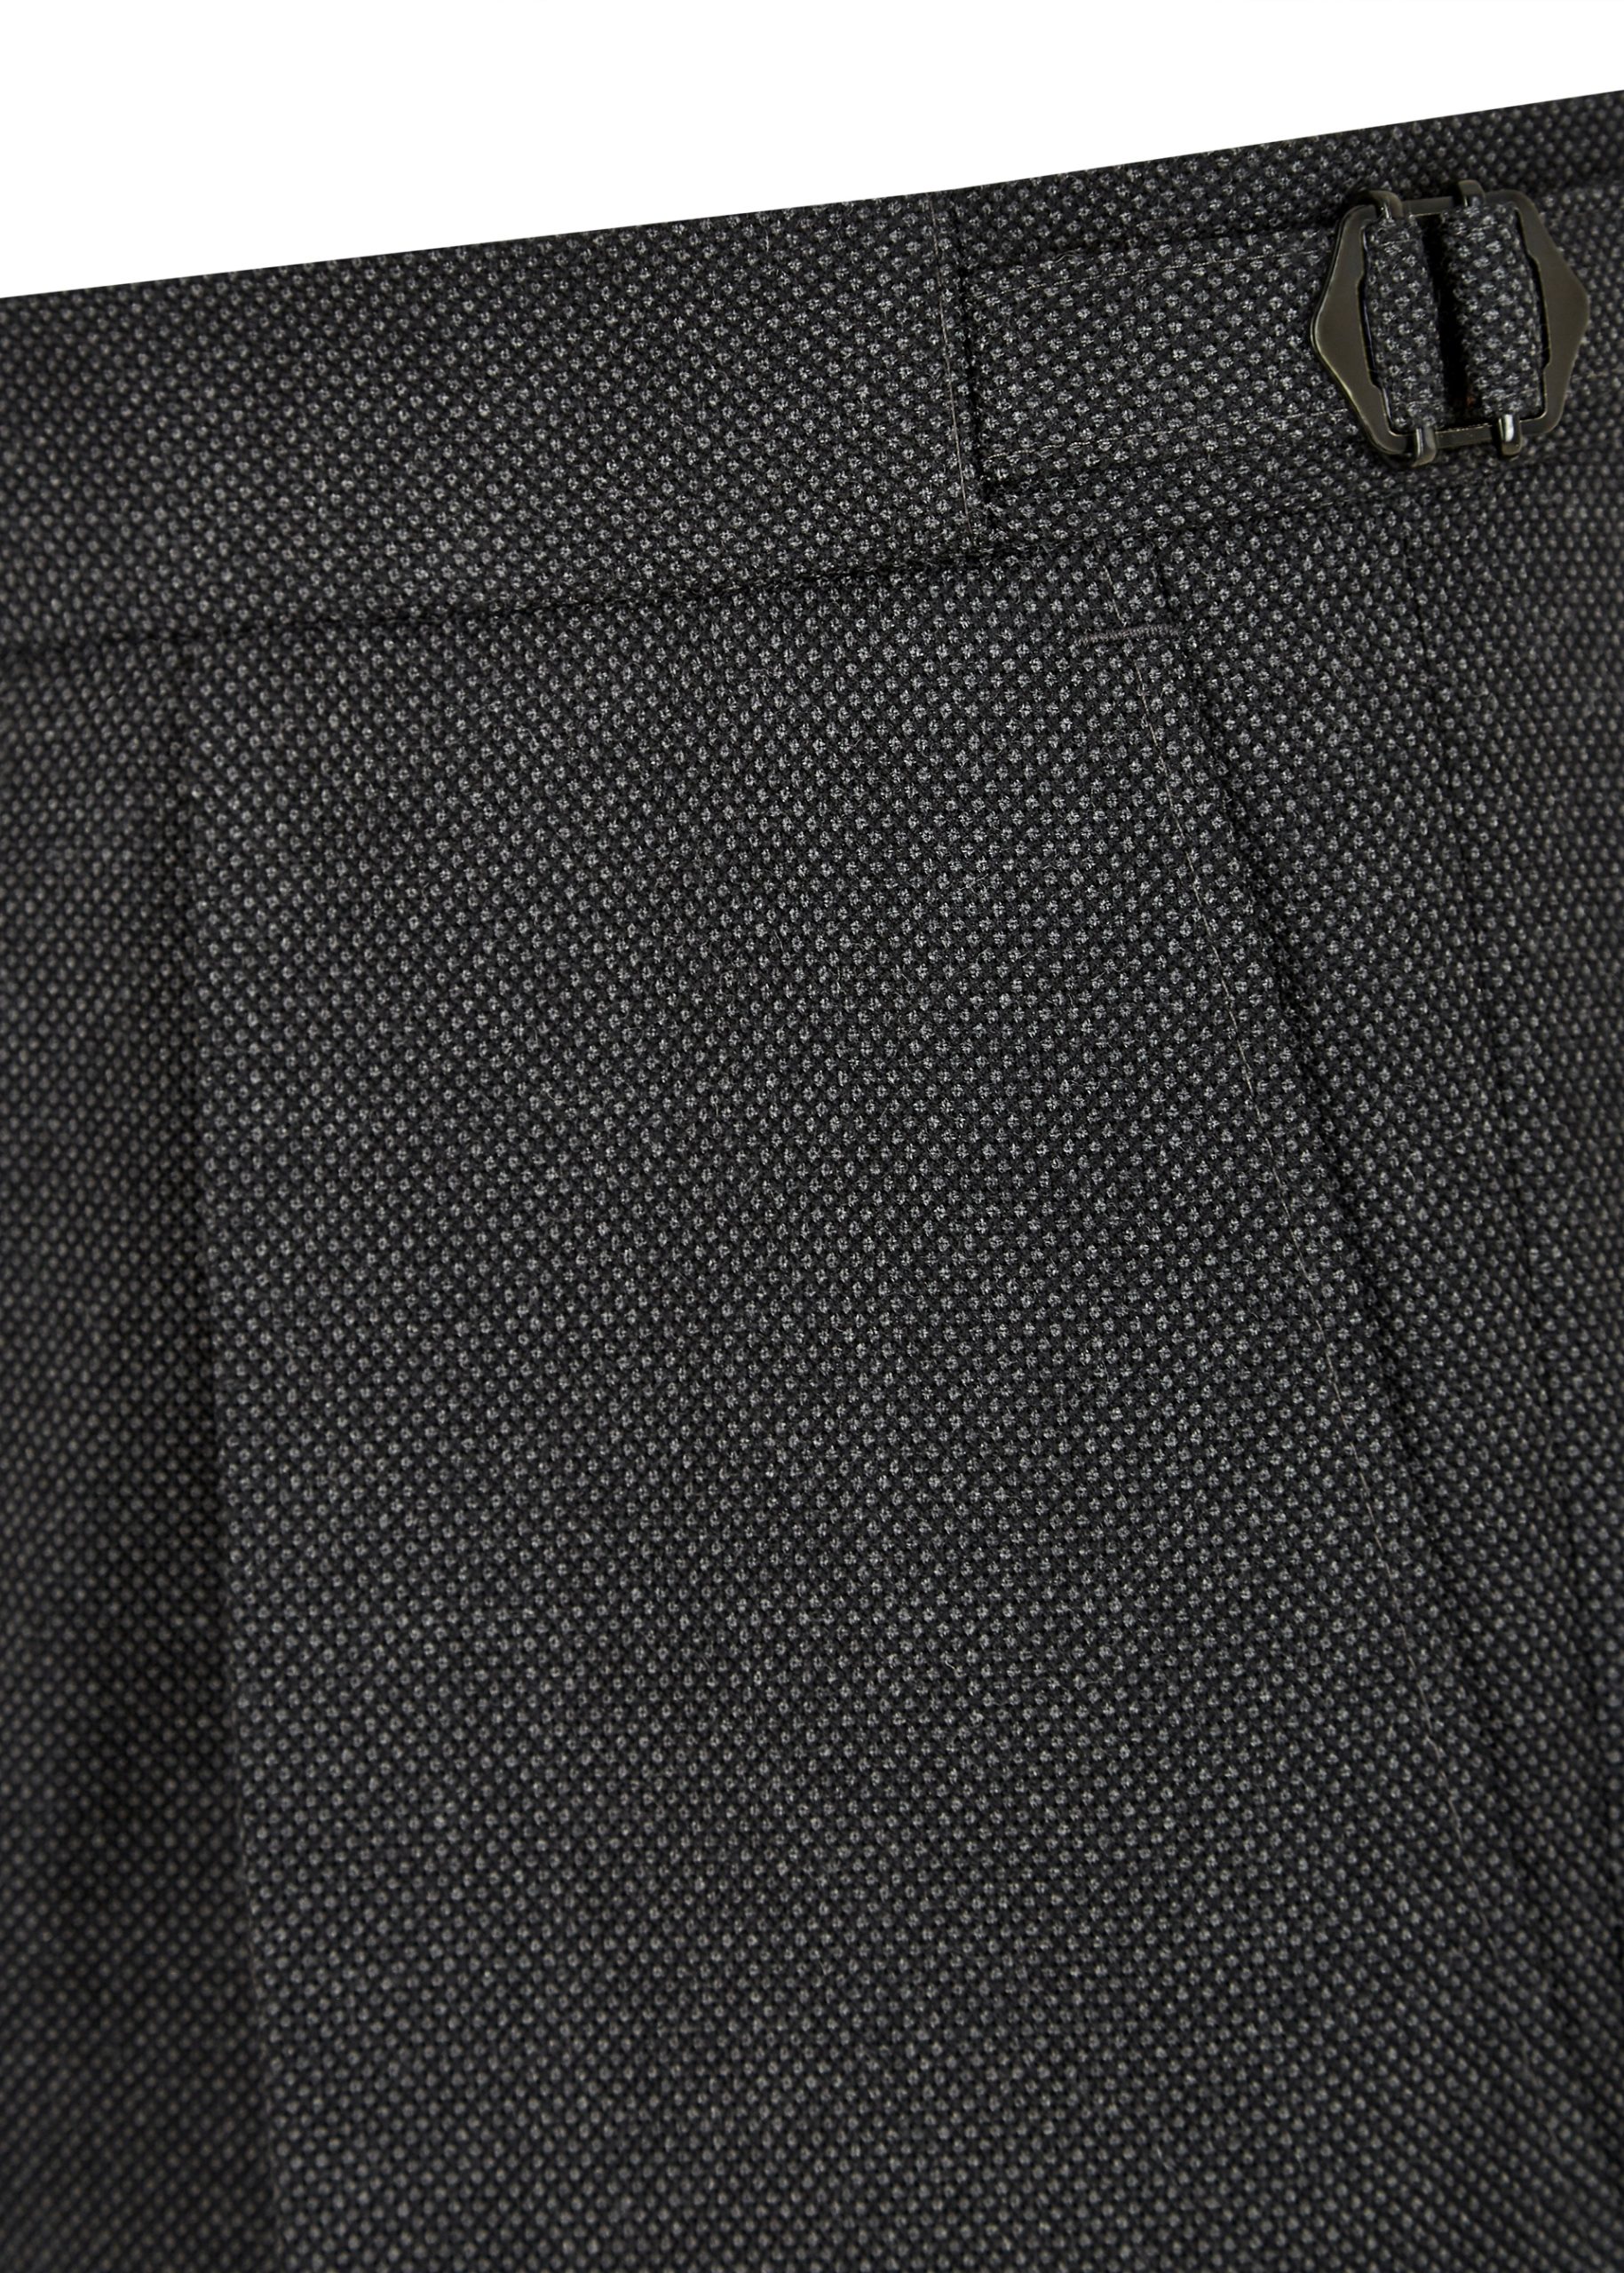 Roderick Charles double breasted grey suit jacket with four buttoned cuff